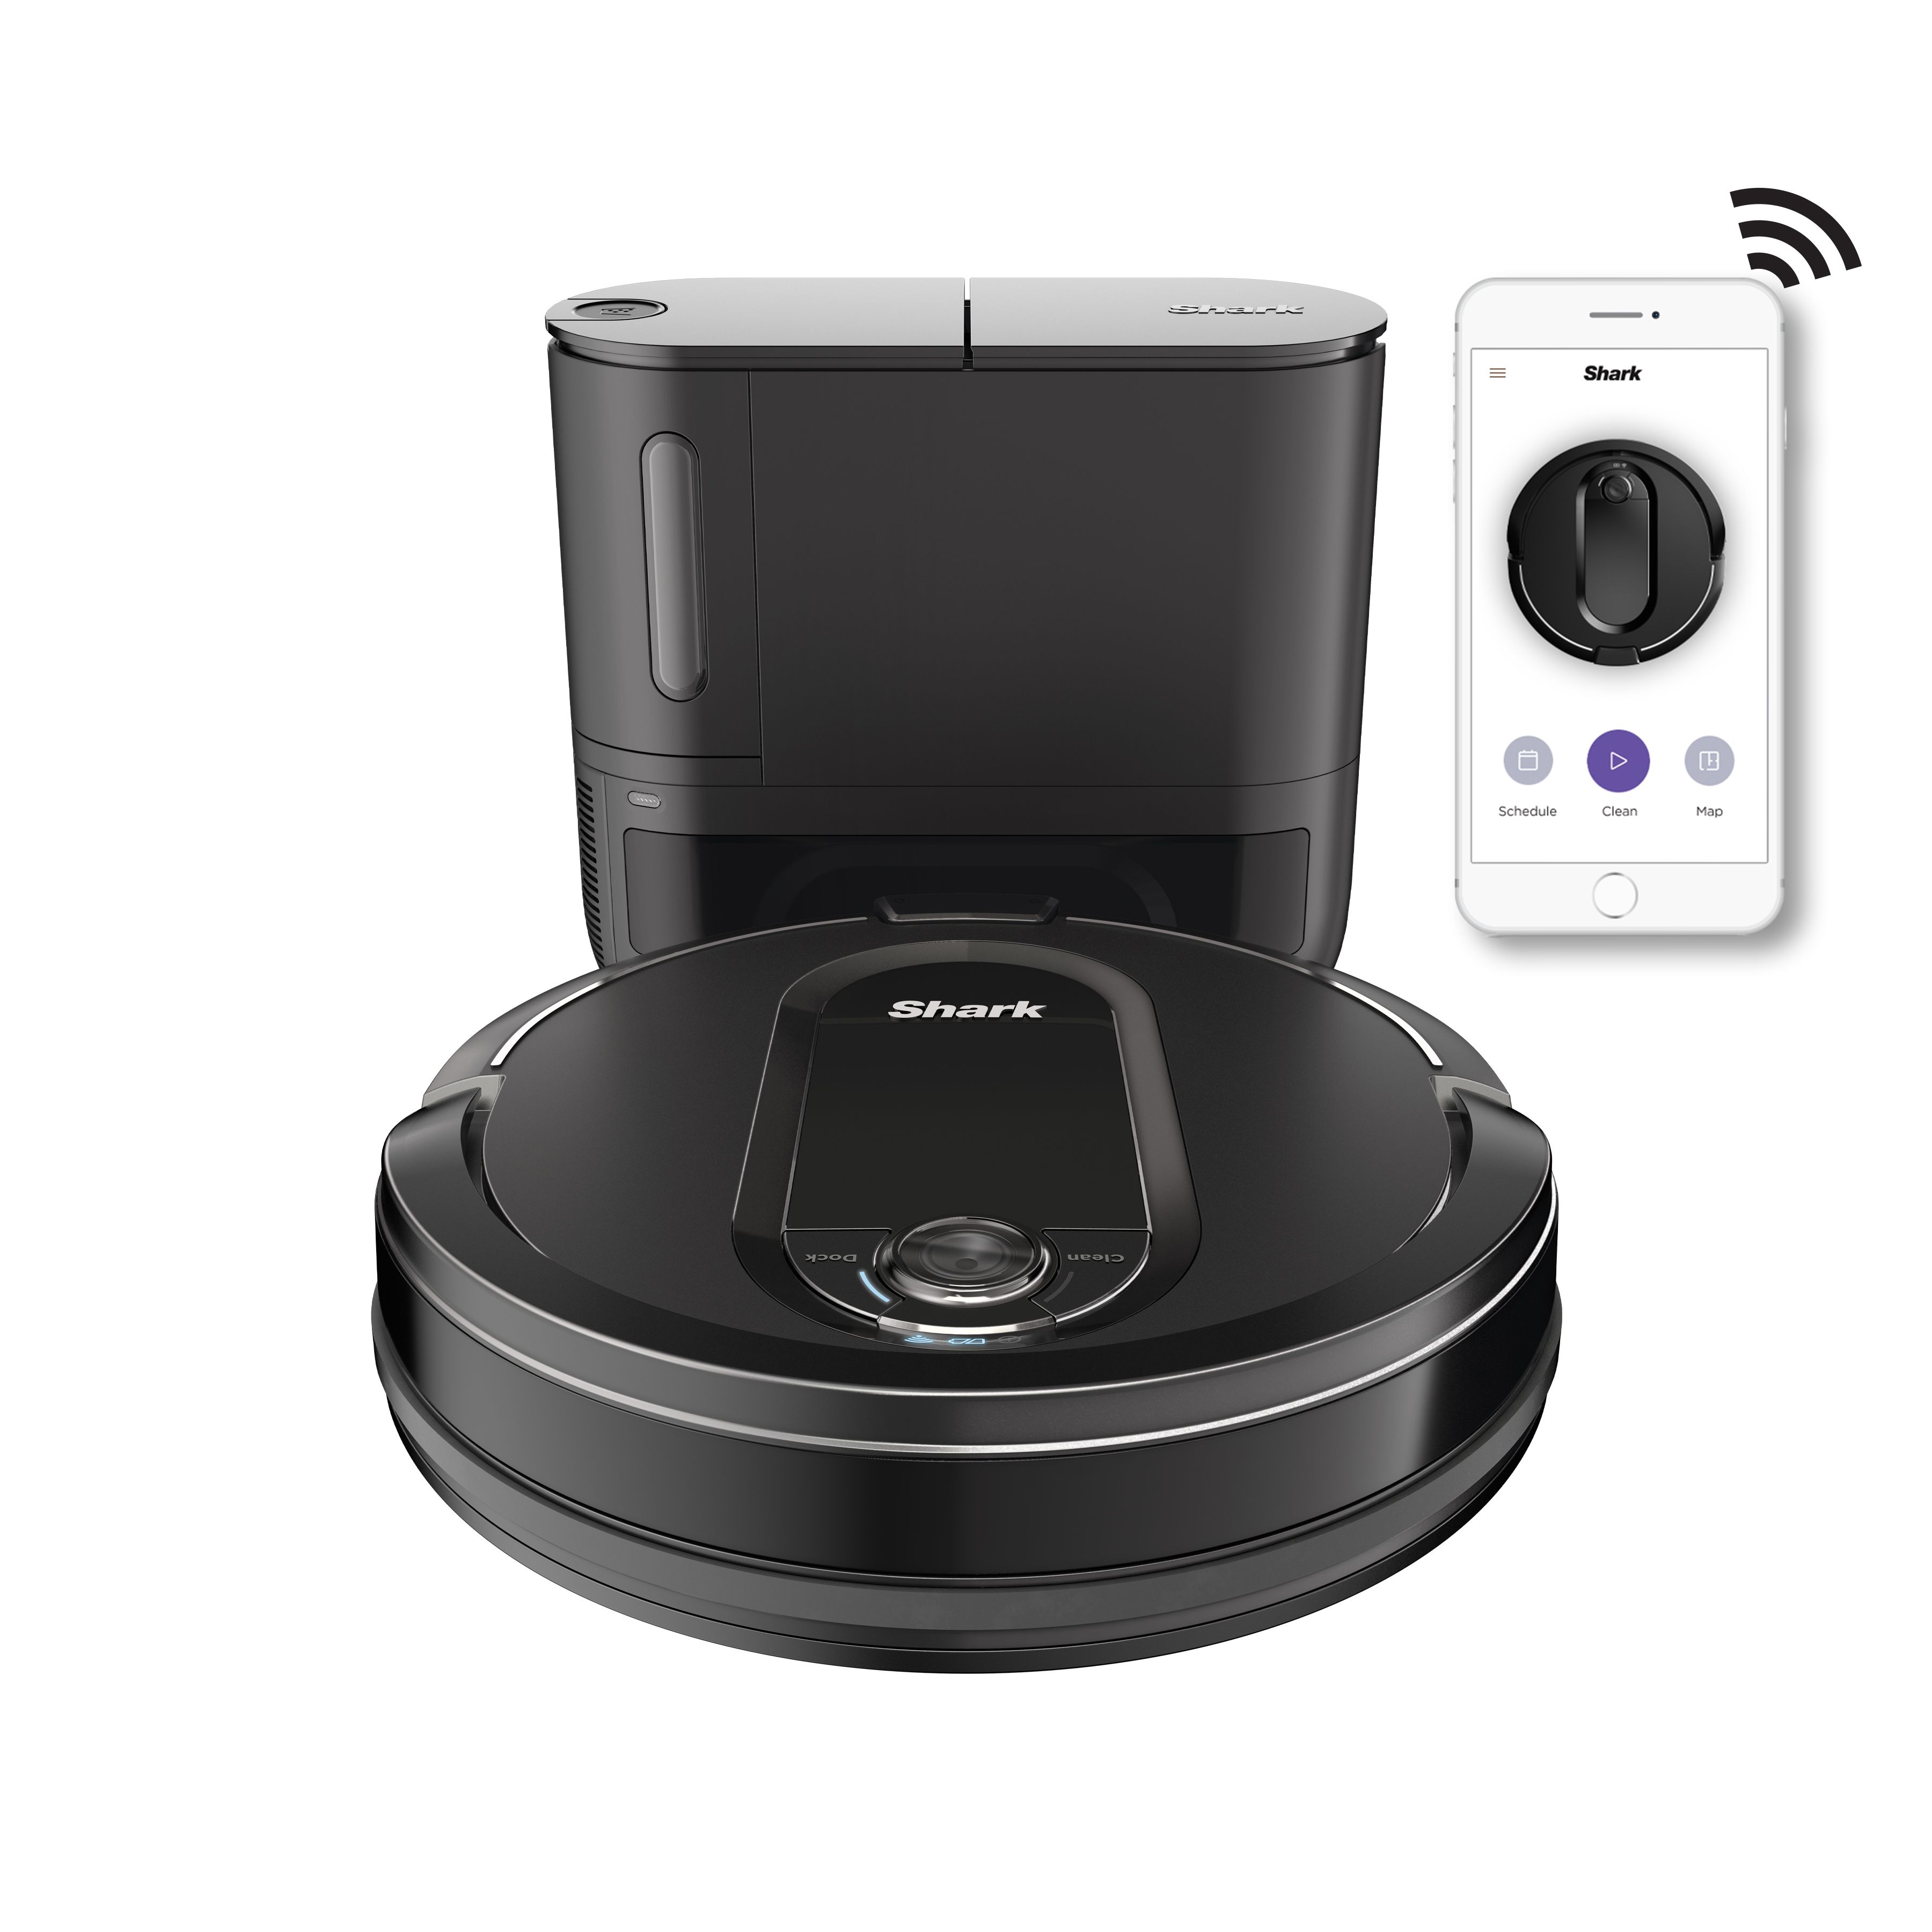 The Shark IQ Robot Vacuum is $70 off for Black Friday at Walmart - HoustonChronicle.com